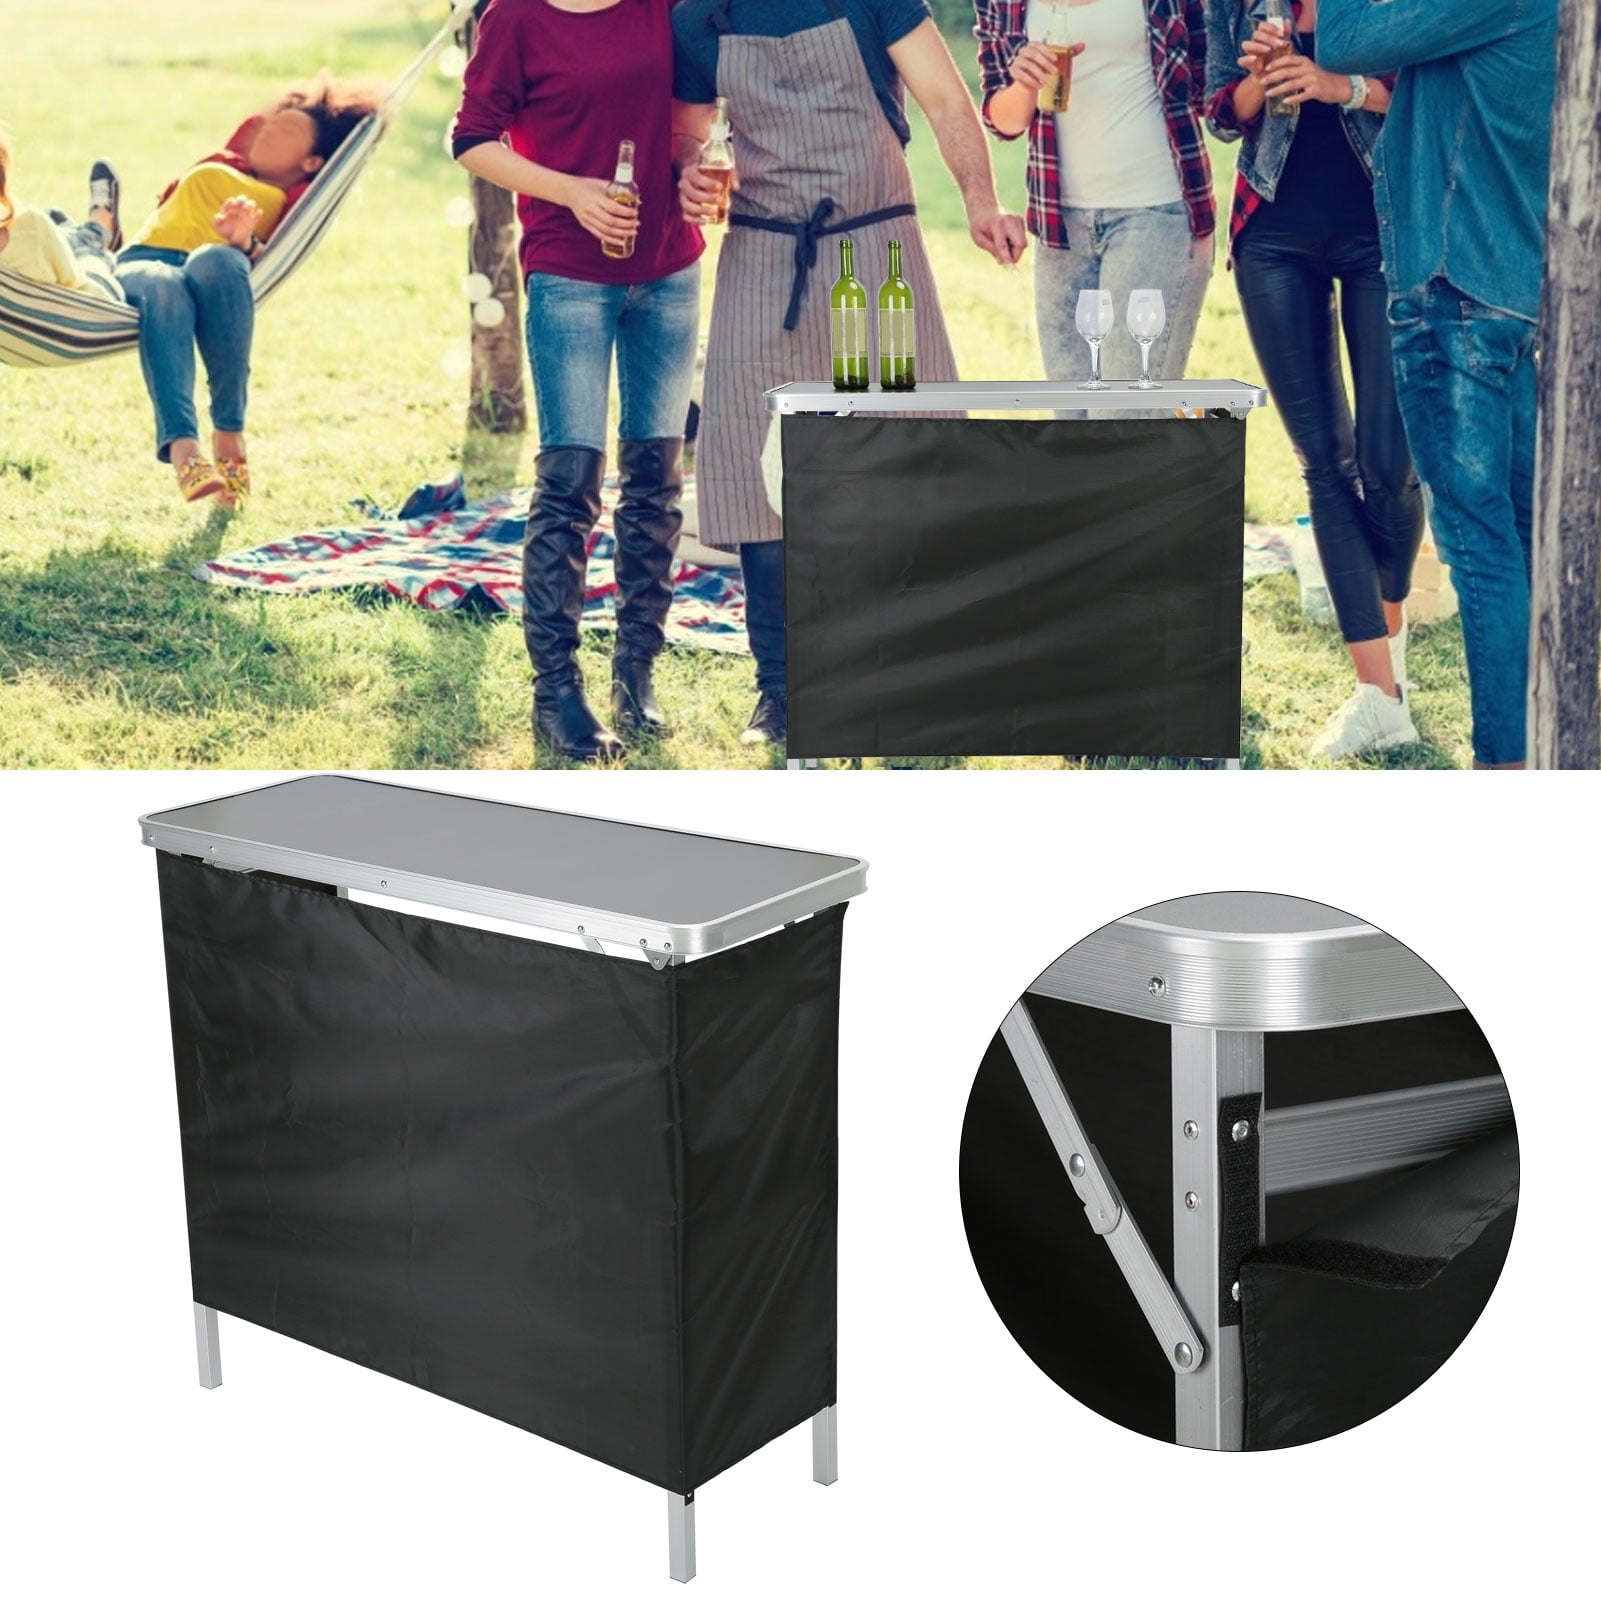 Fugacal Portable Bar Table Multipurpose Folding Storage Table Furniture for Party Trade Show,Party Supplies,Bar Table